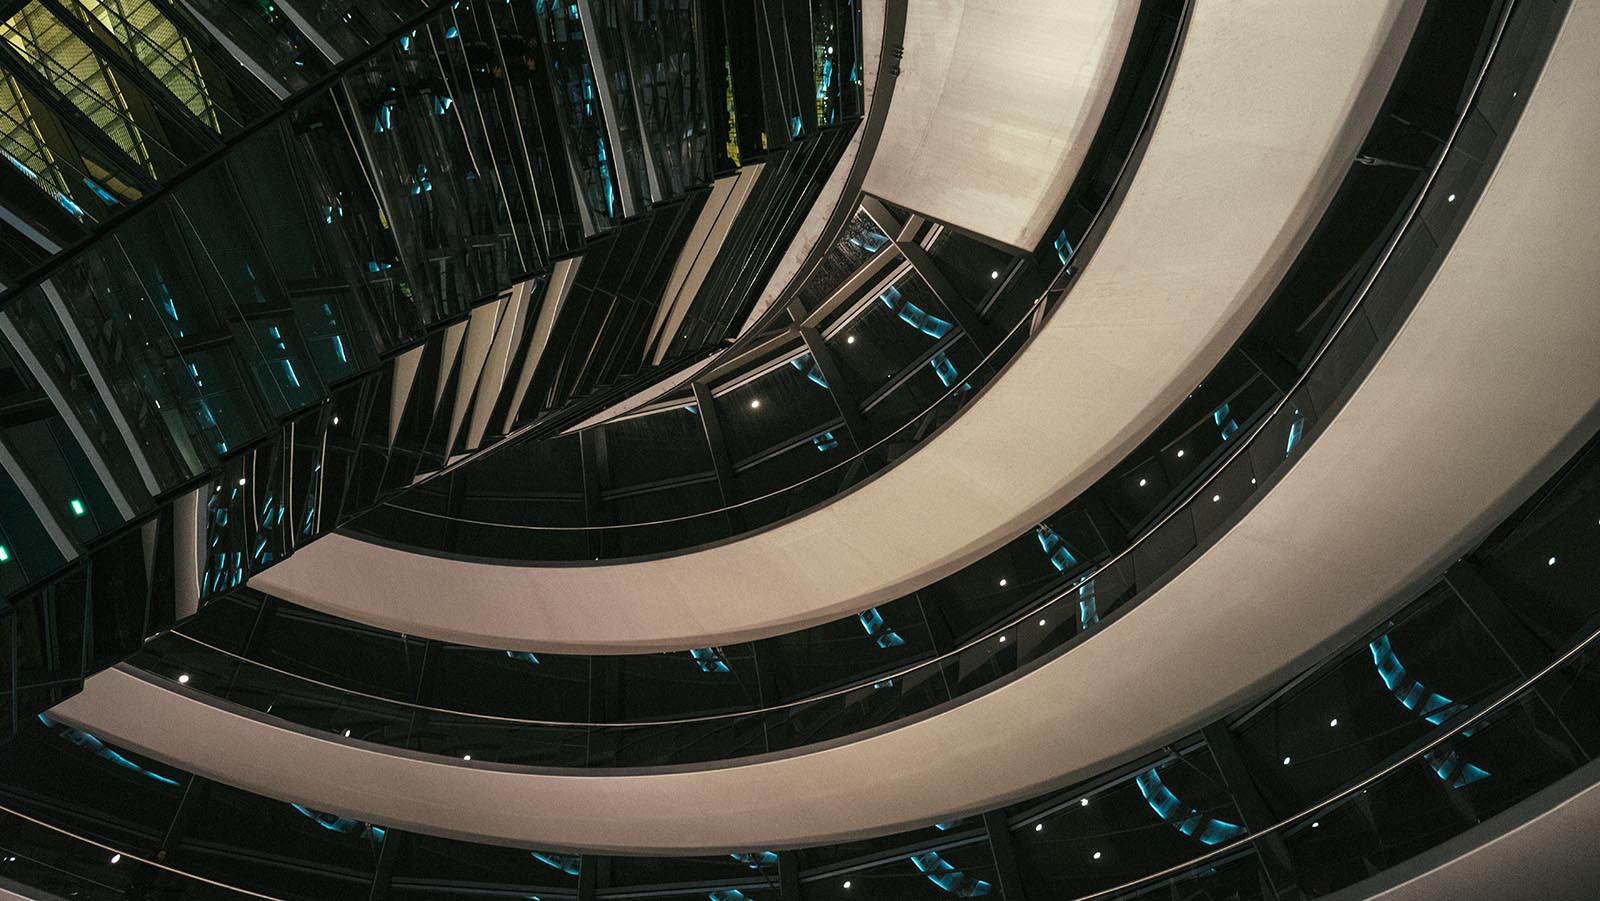 Inside The Reichstag Building At Night